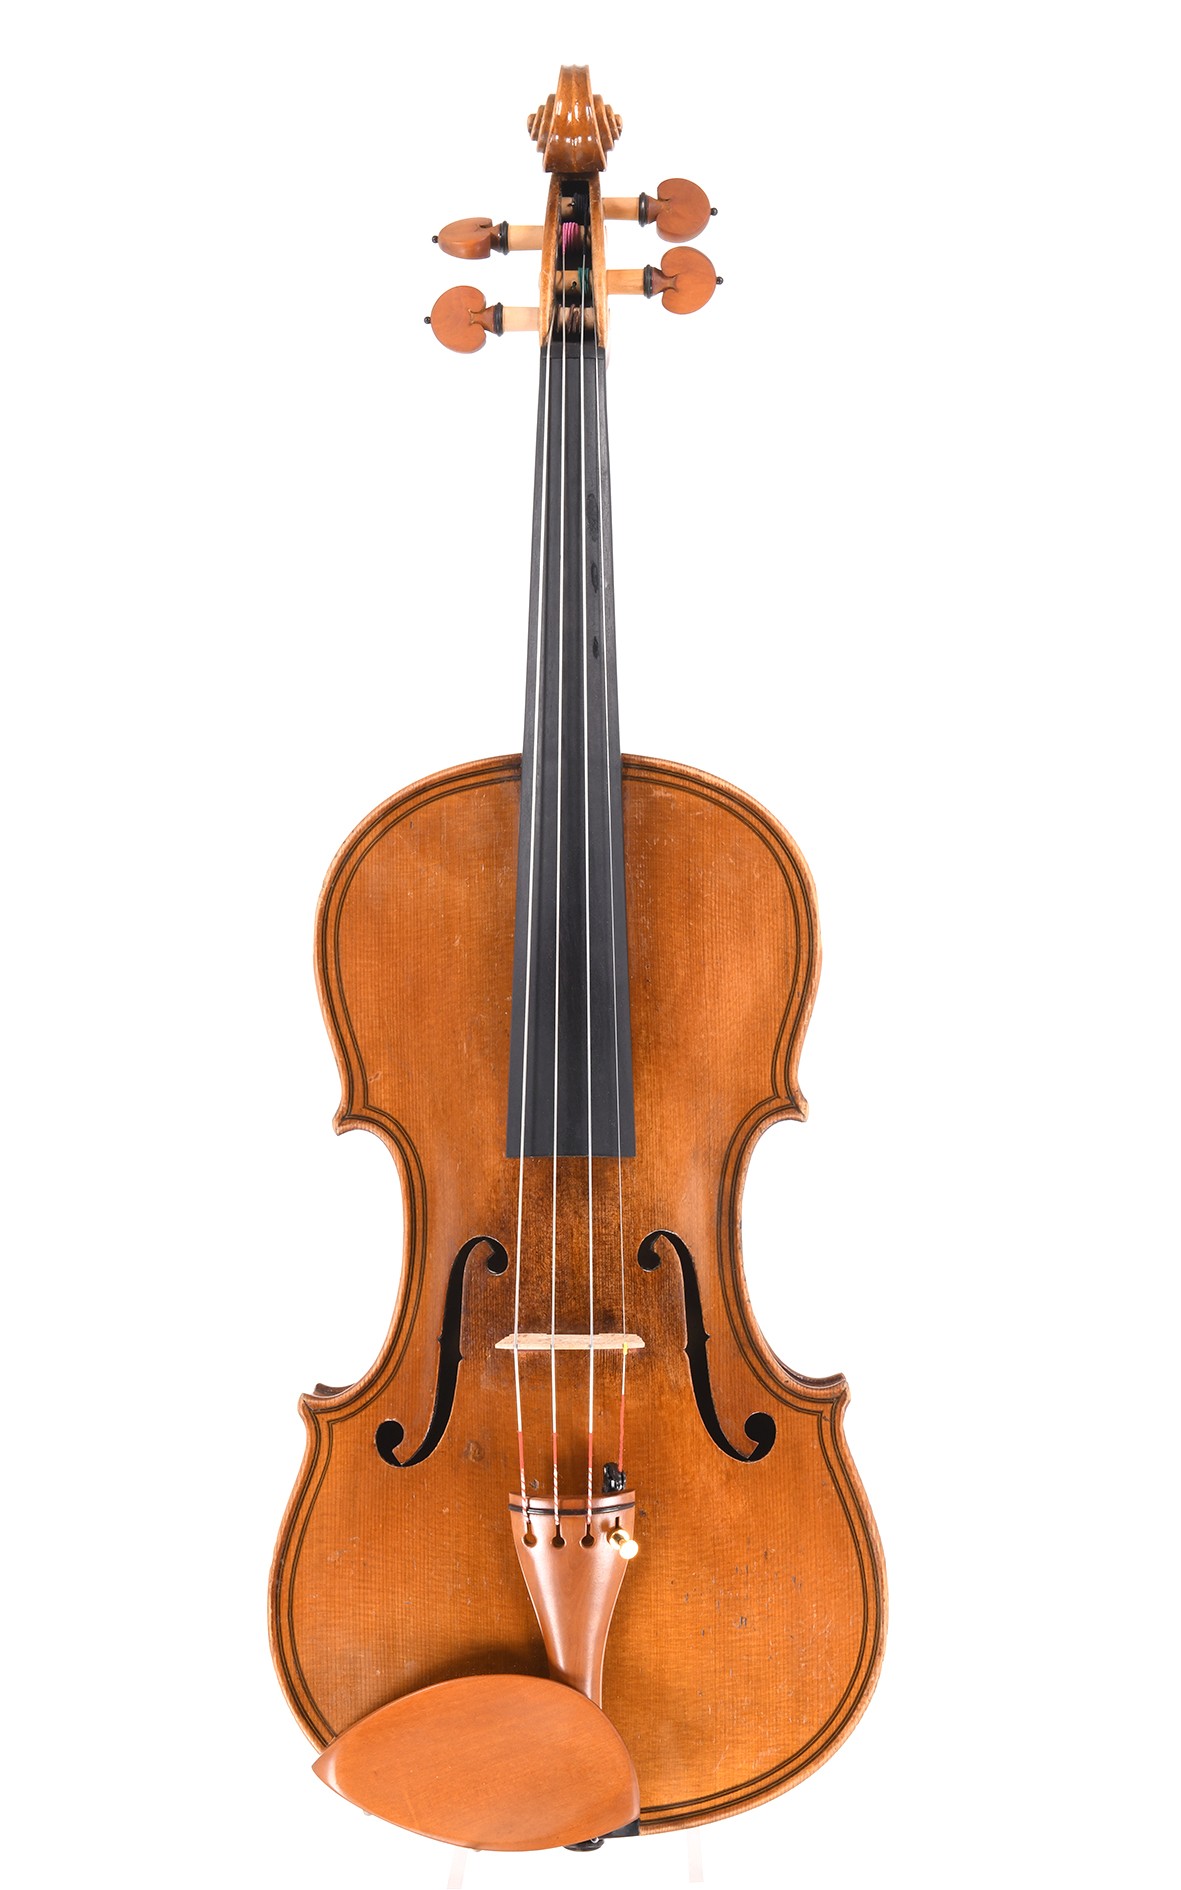 Exceptionally beautiful violin, after Maggini - top with double purfling